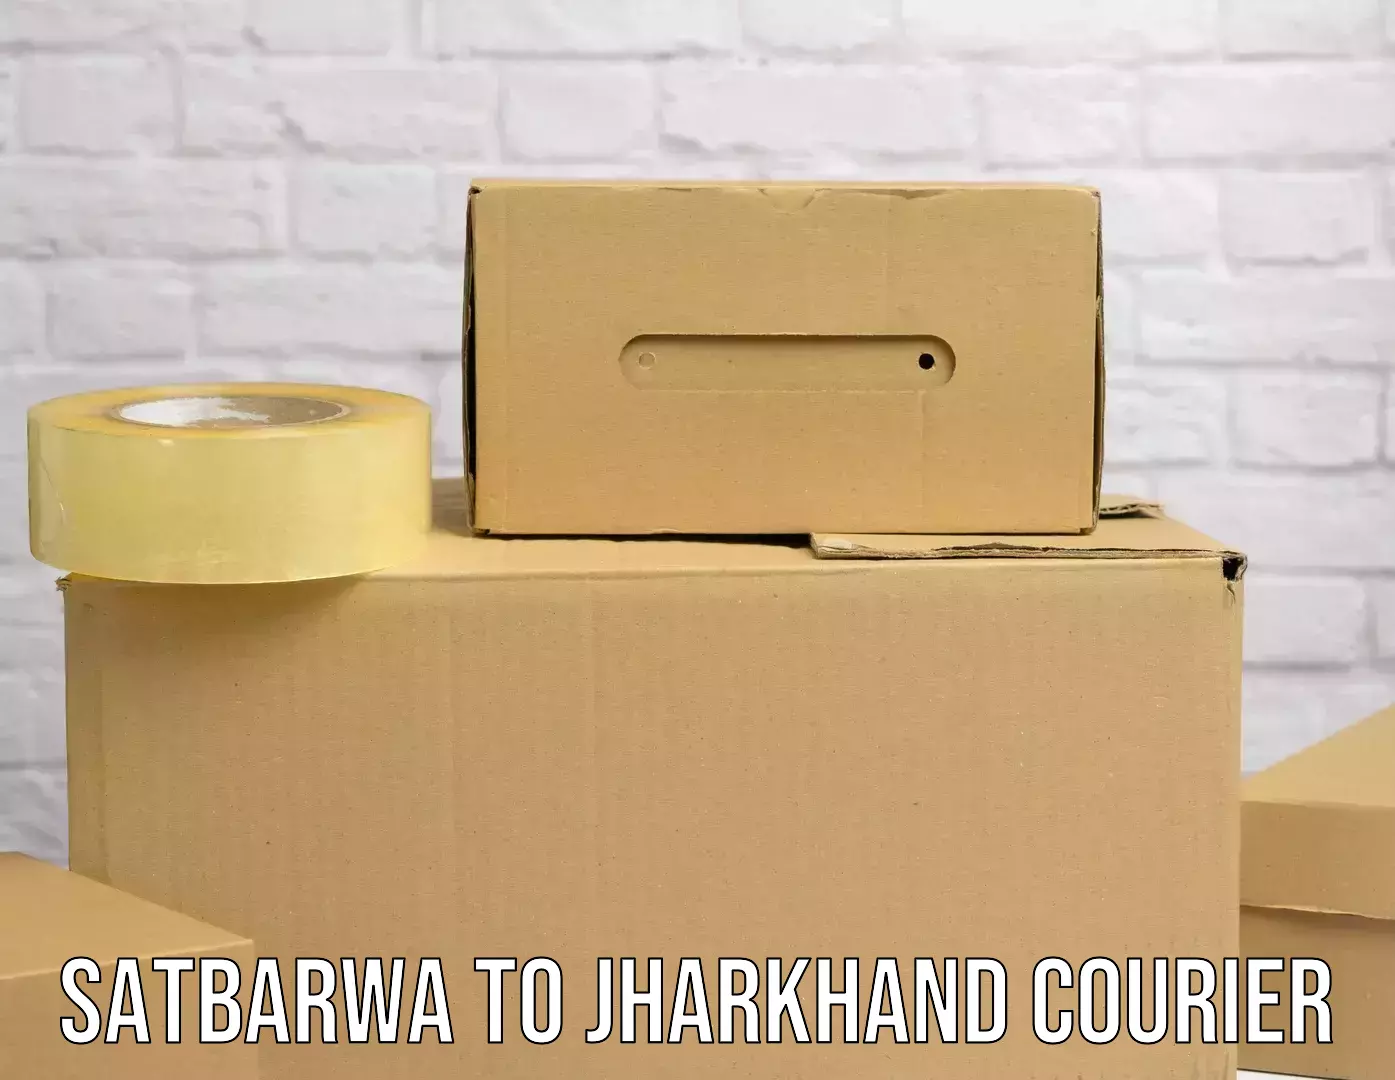 Automated shipping processes Satbarwa to Jamshedpur